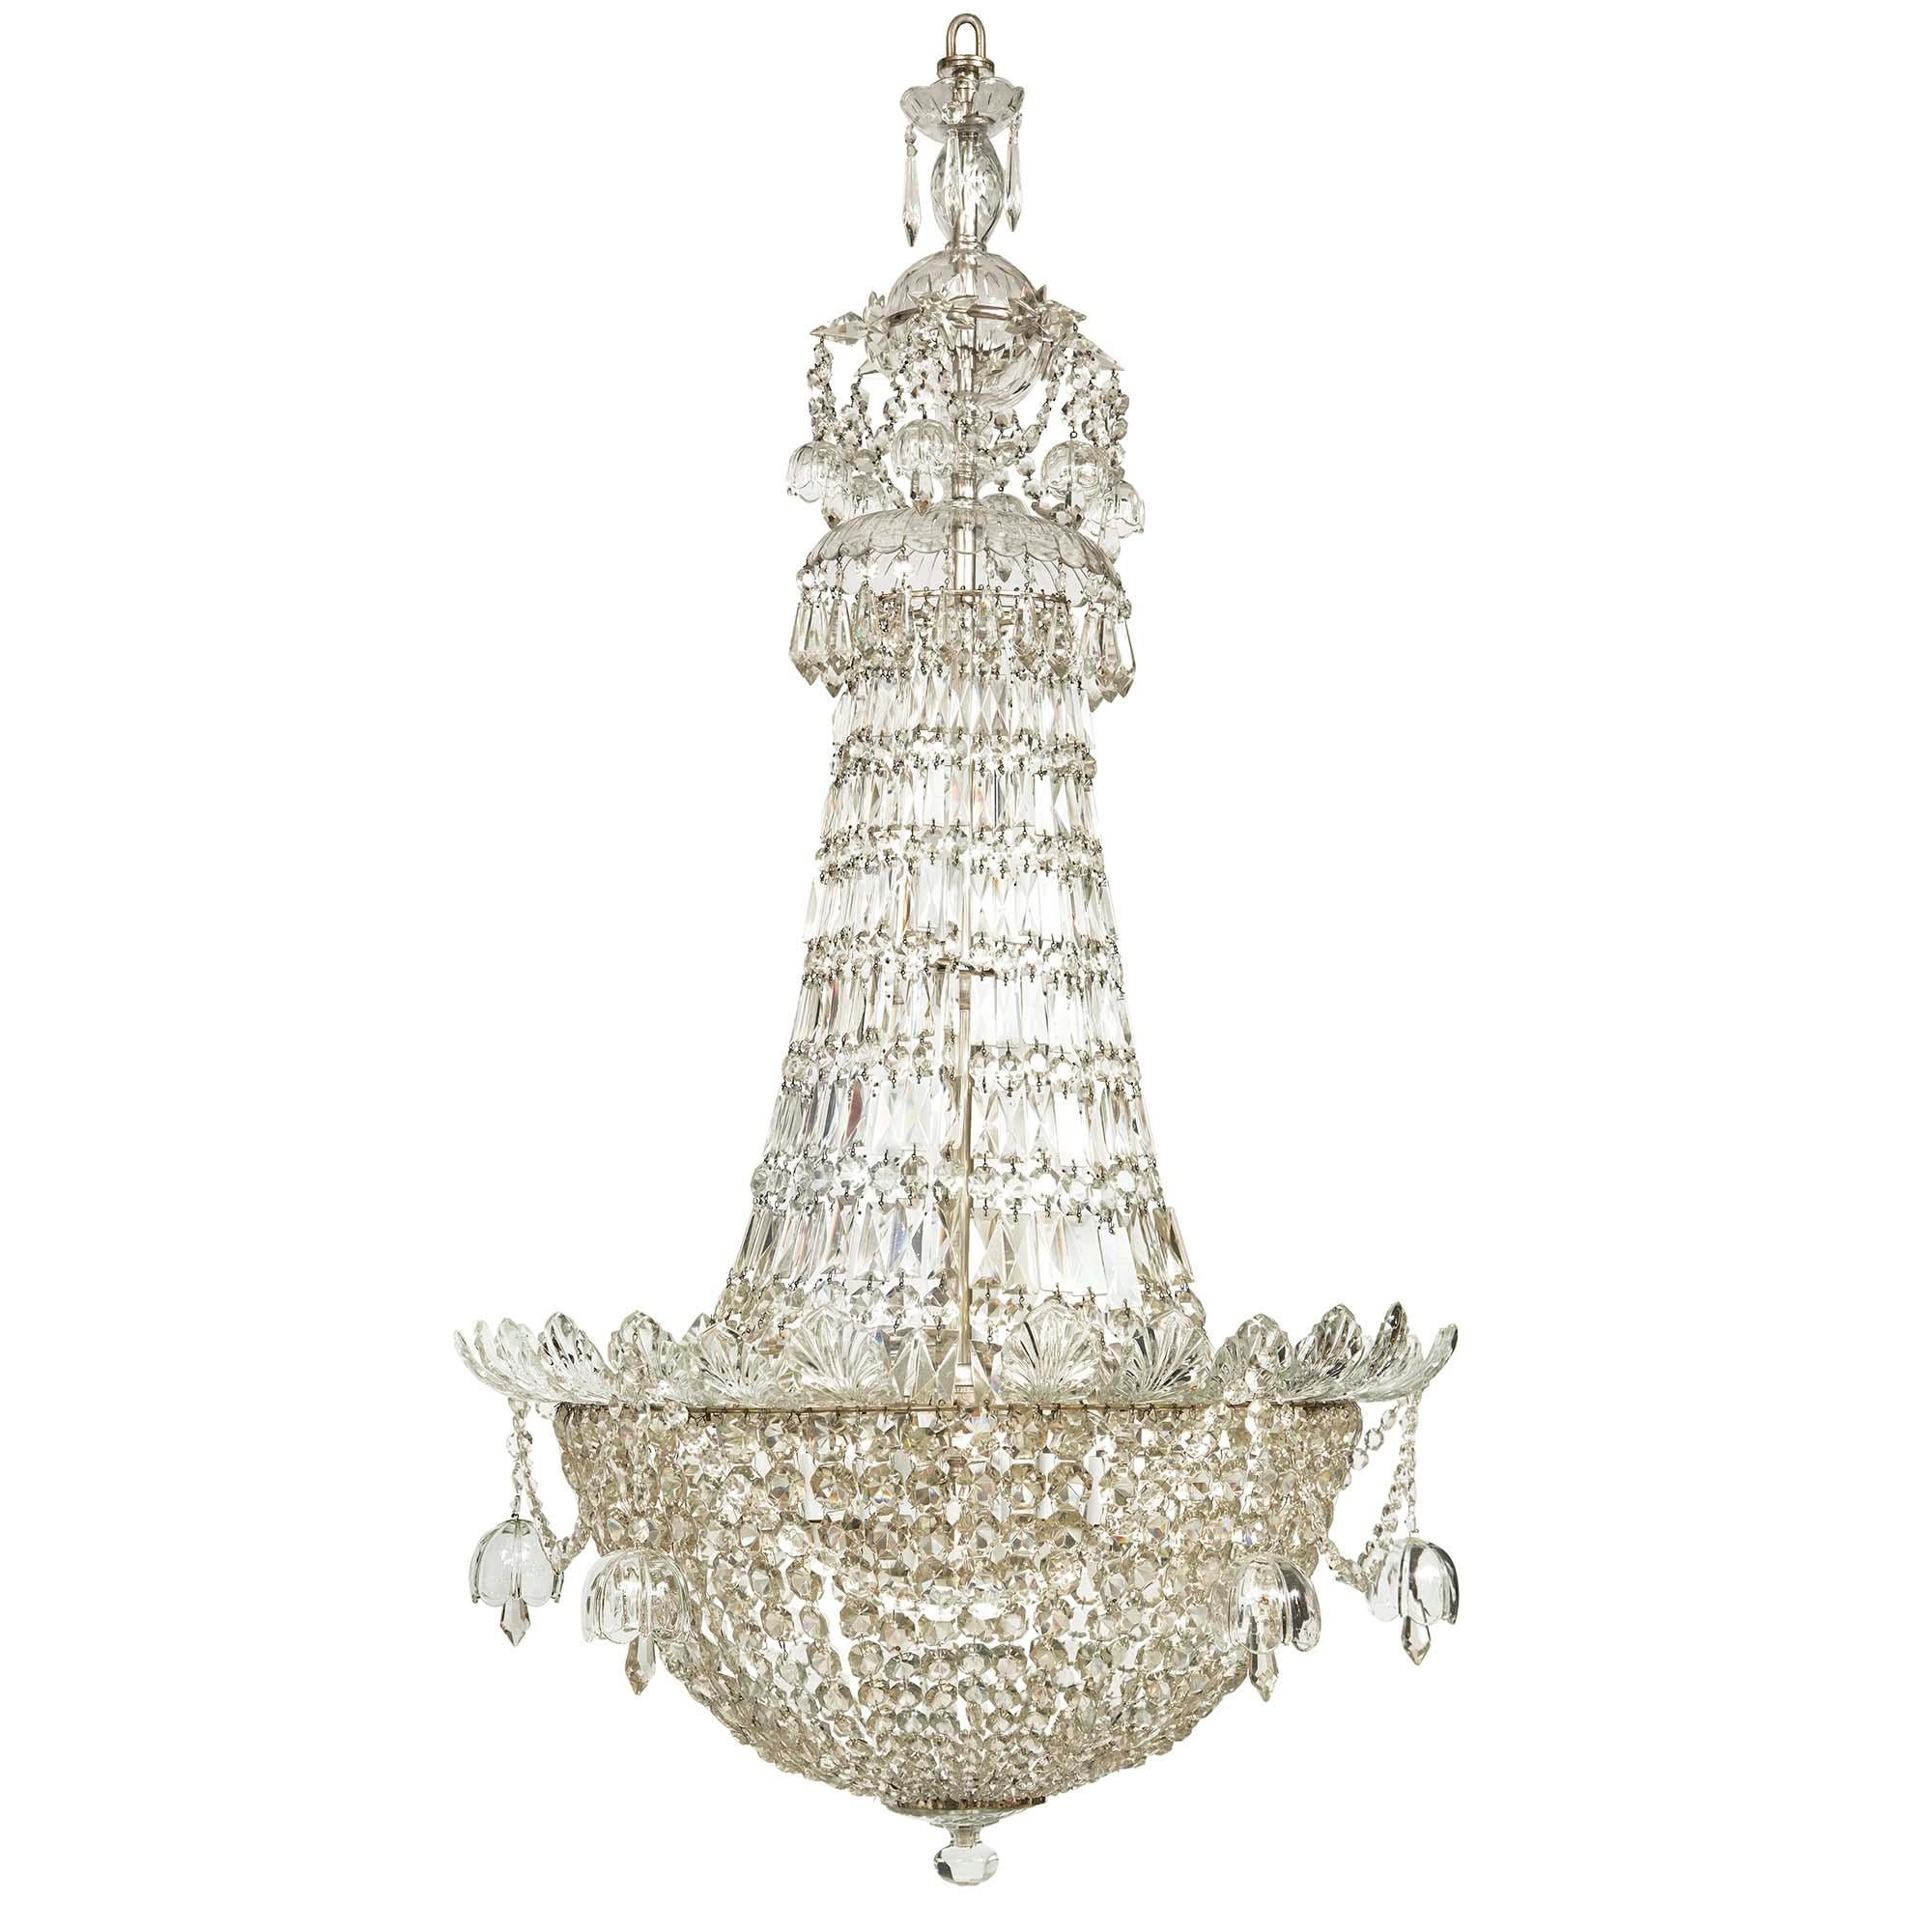 A stunning and very high quality English Louis XVI st. 19th century silvered bronze and Waterford crystal twelve light chandelier. The chandelier with a bottom dome with octagon shaped cut crystal garlands lead to a central band of crystal